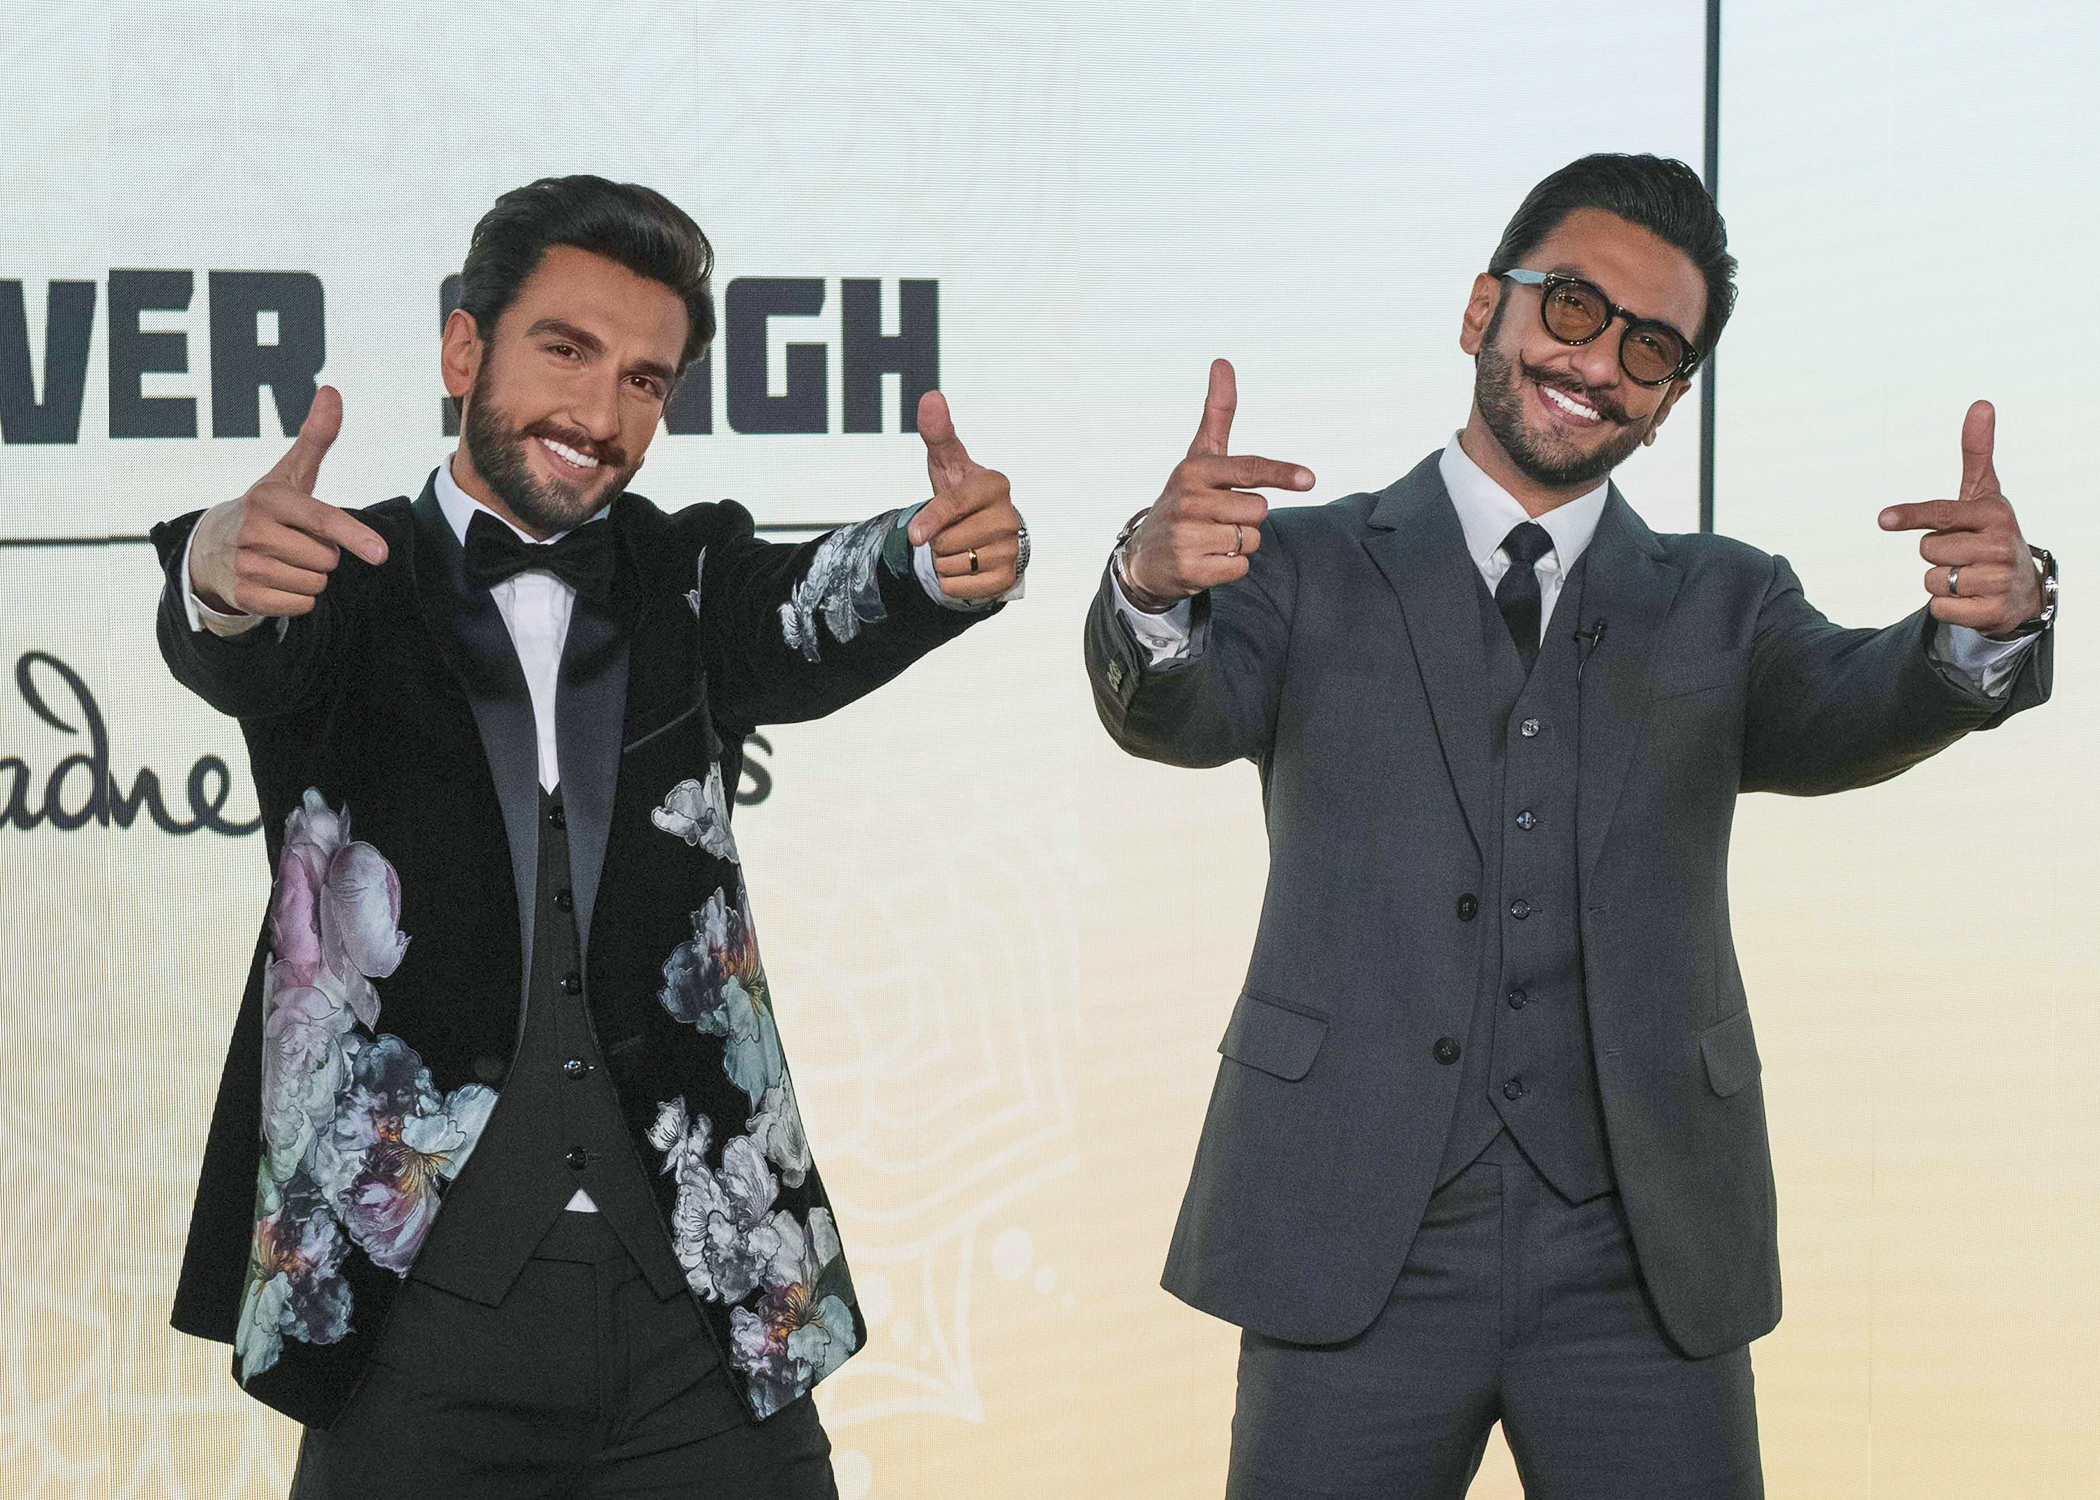 Ranveer Singh's figure donning a gorgeous custom tuxedo featuring a velvet blazer with floral embellishments